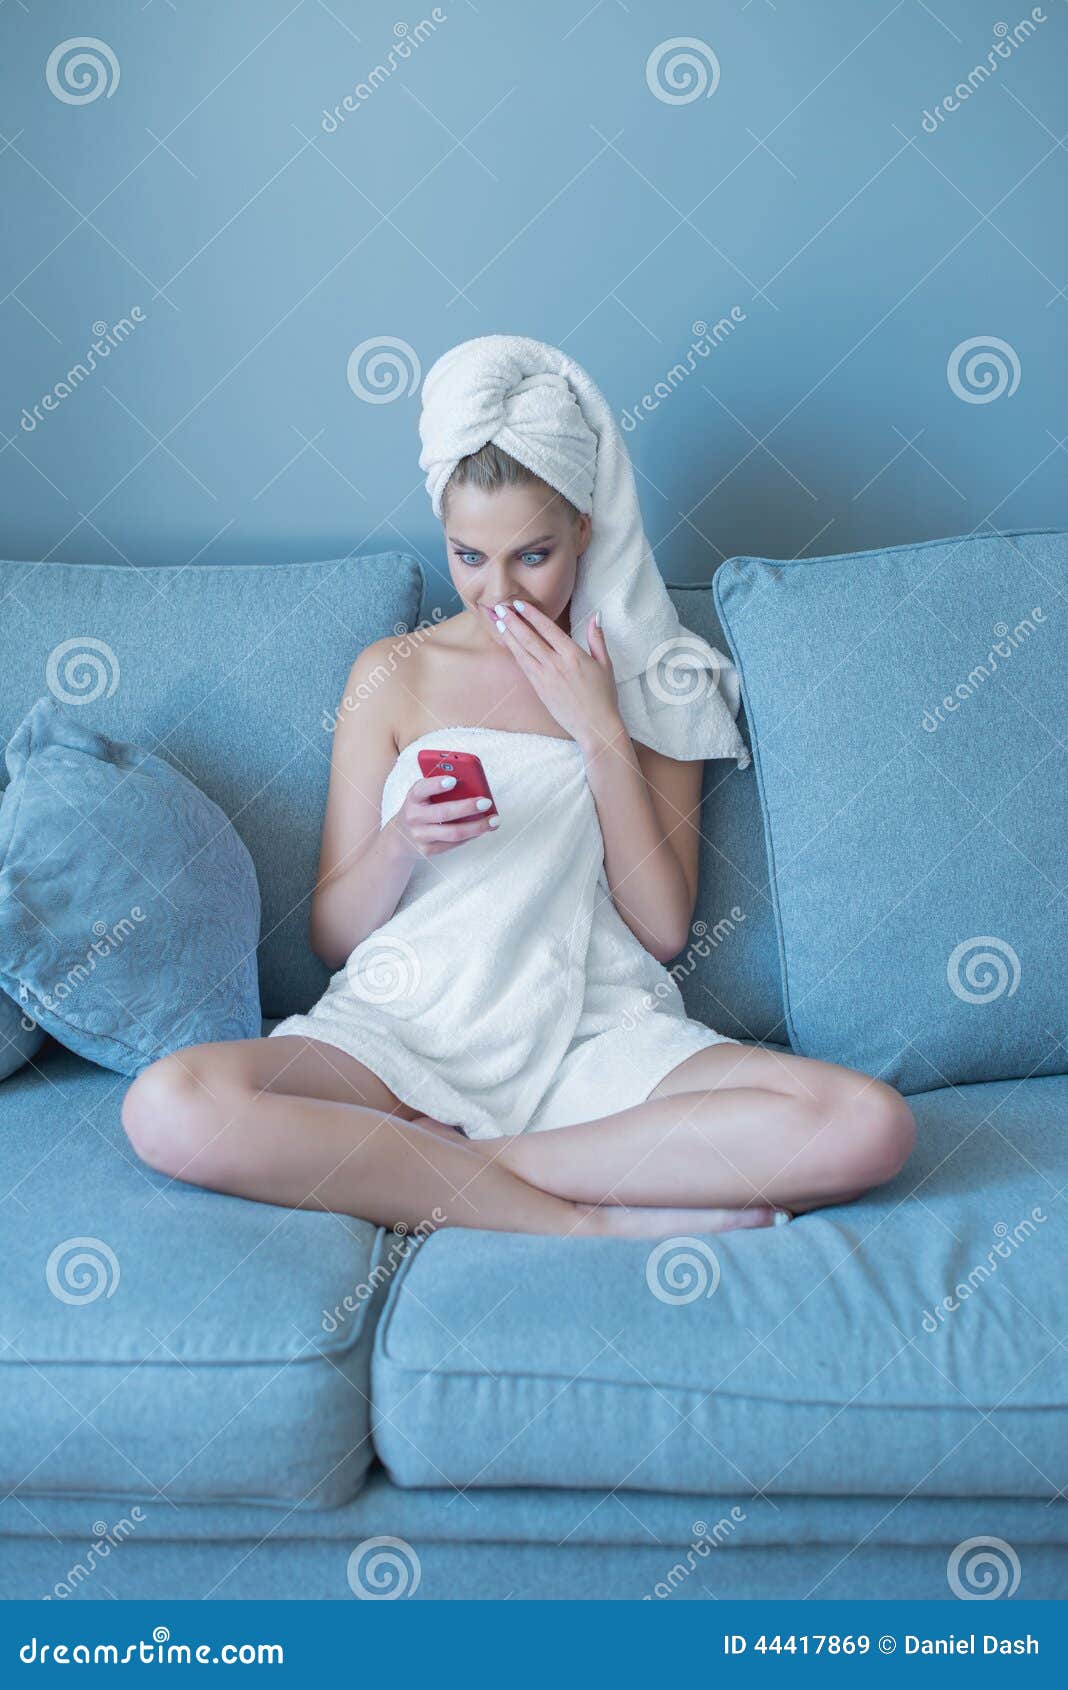 Woman In Bath Towel With Cell Phone On Sofa Stock Image Image Of Girl